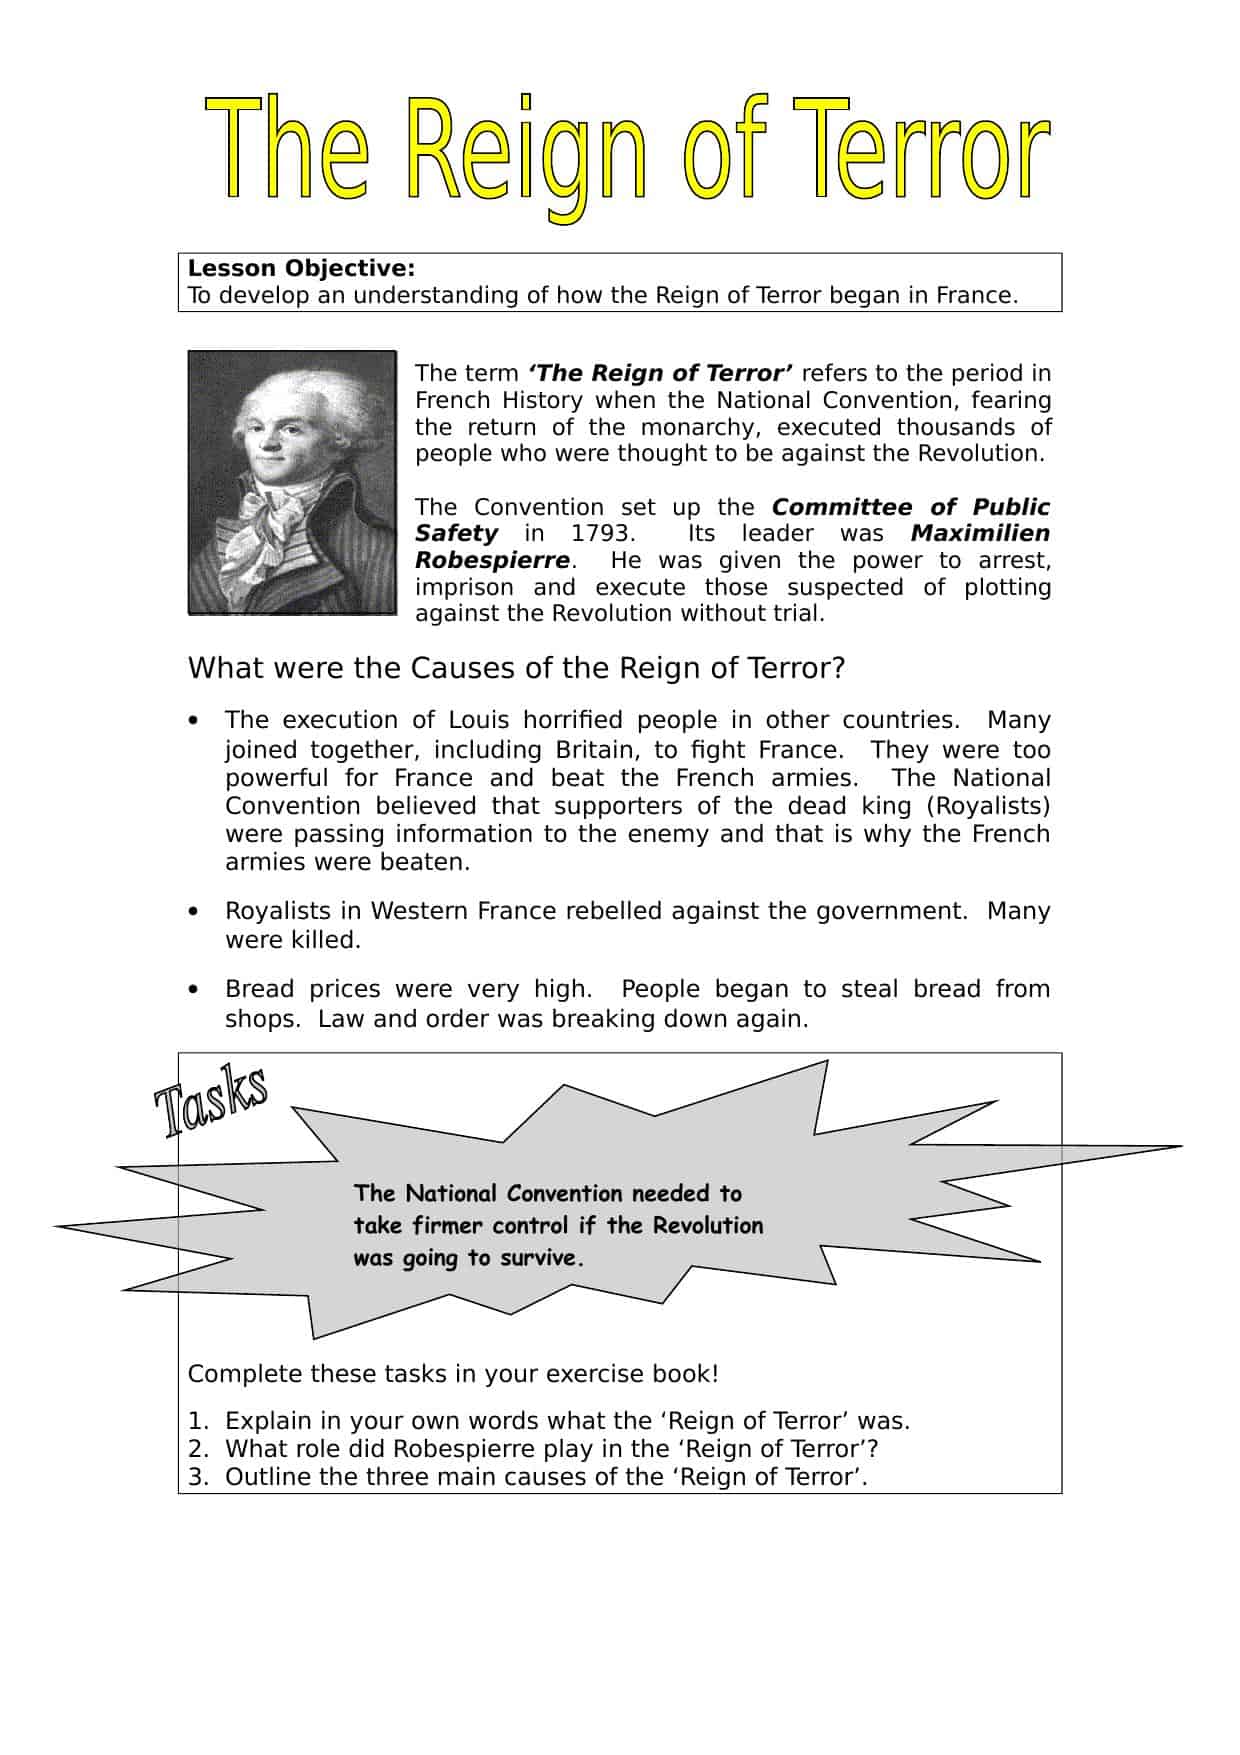 Causes Of The Reign Of Terror Worksheet